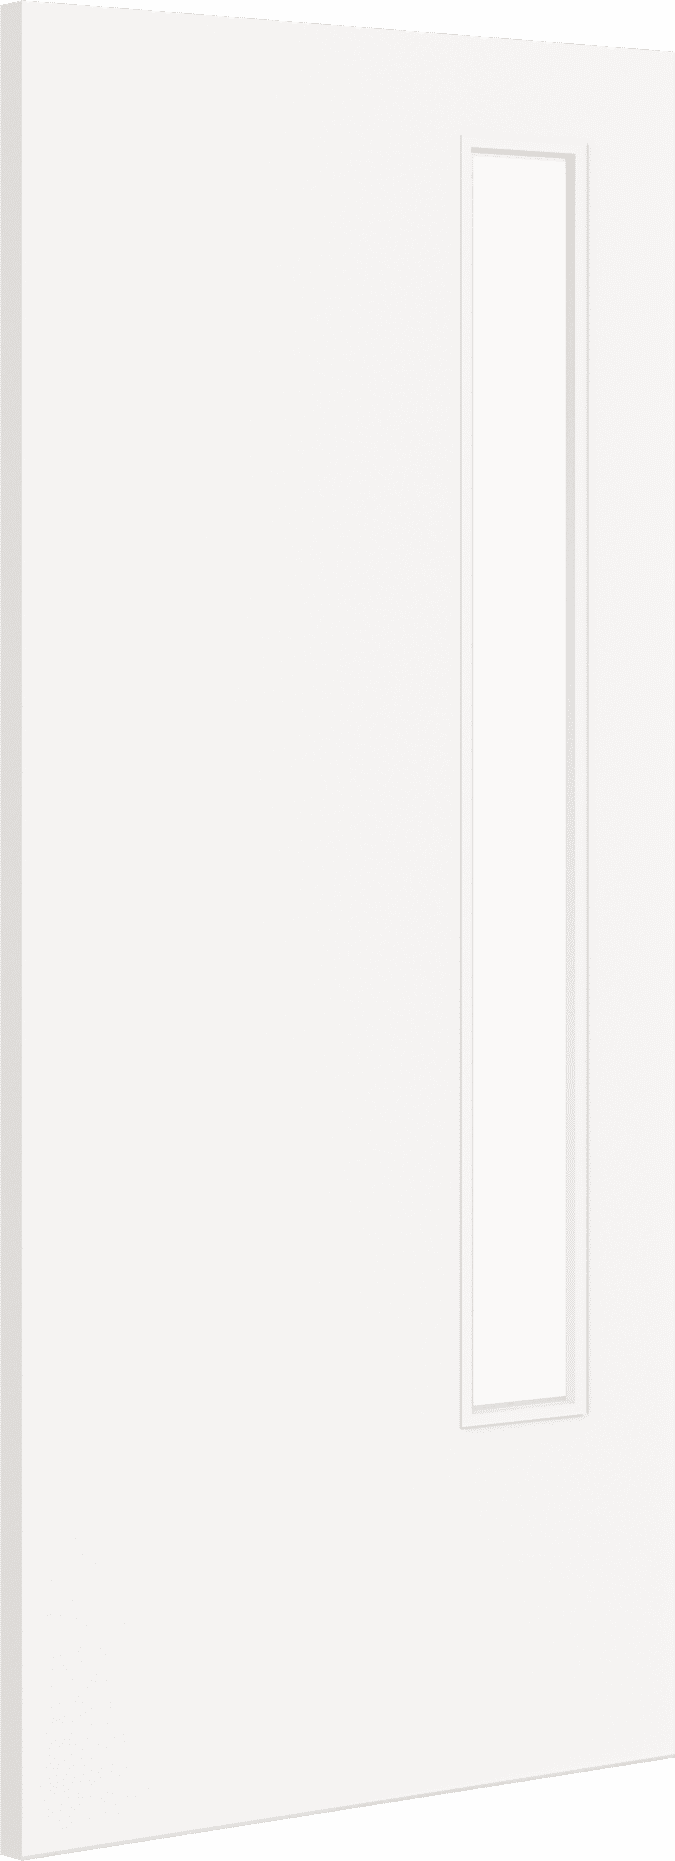 1981mm x 762mm x 44mm (30") Architectural Paint Grade White 13 Clear Glazed Fire Door Blank